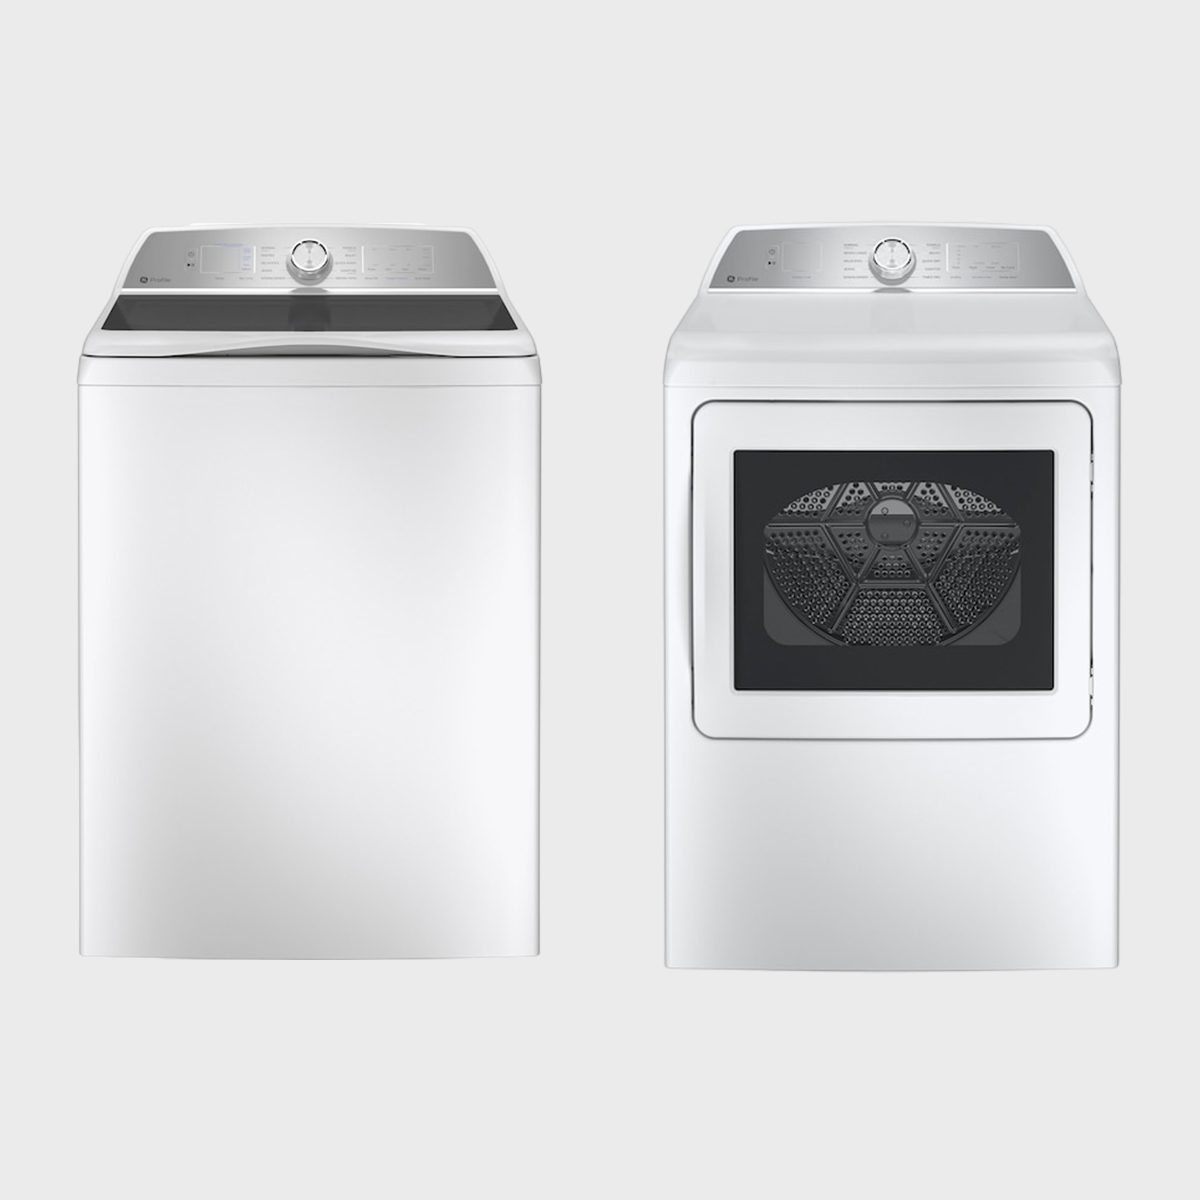 Ge Profile High Efficiency Top Load Washing Machine With Flexdispense And Electric Vented Dryer